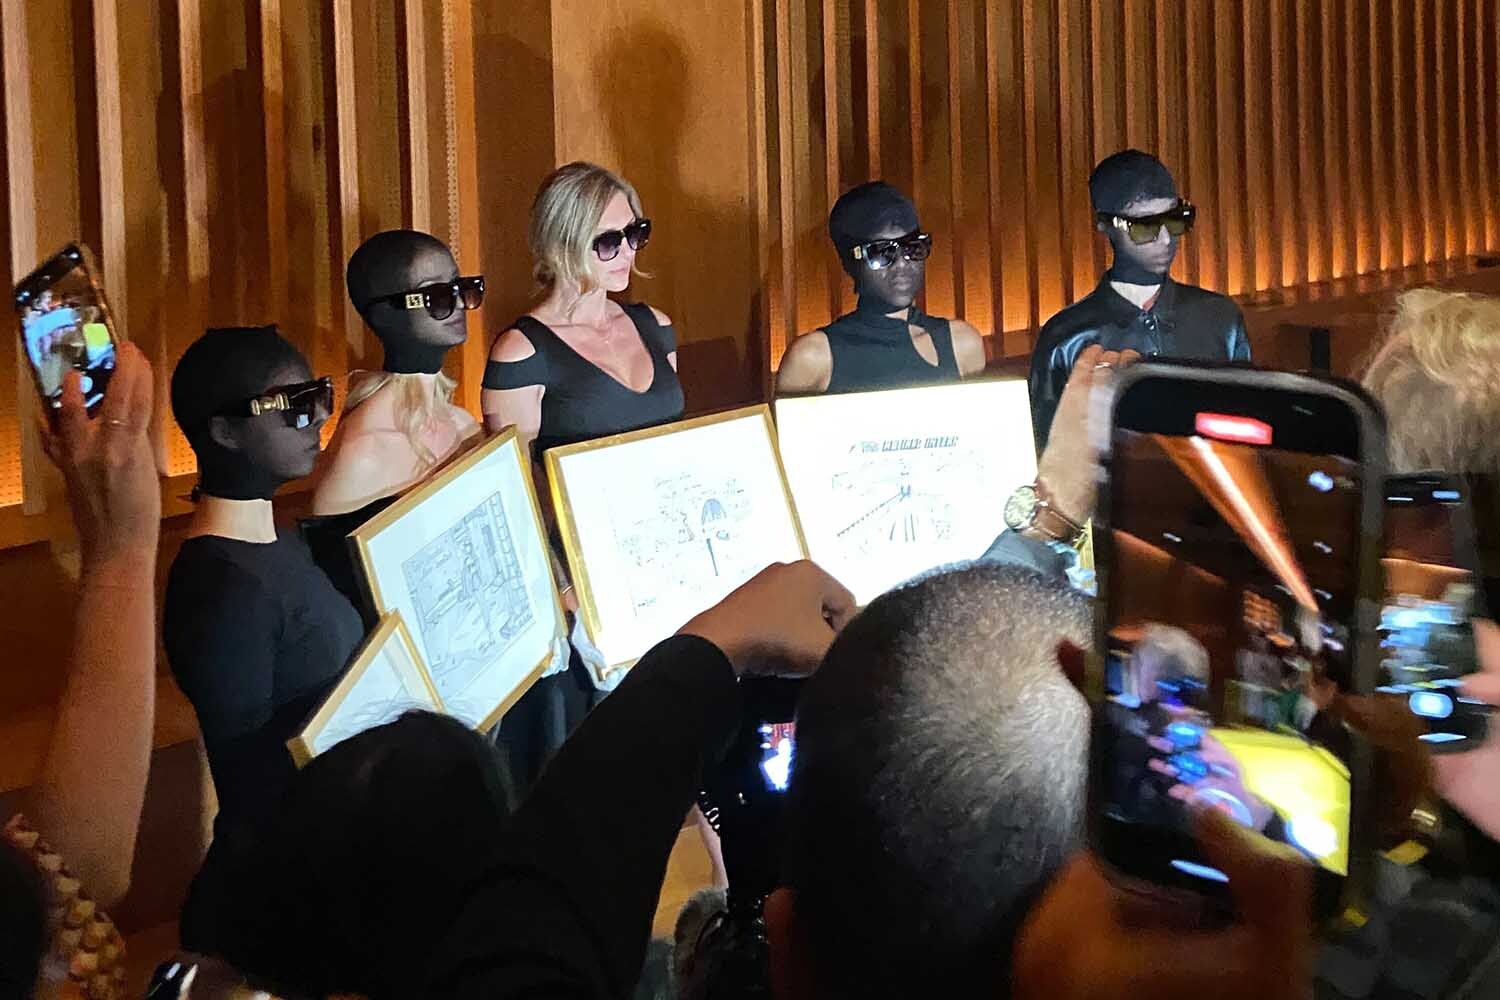 Models pose for photos holding Anna Delvey's sketches at her art show in NYC